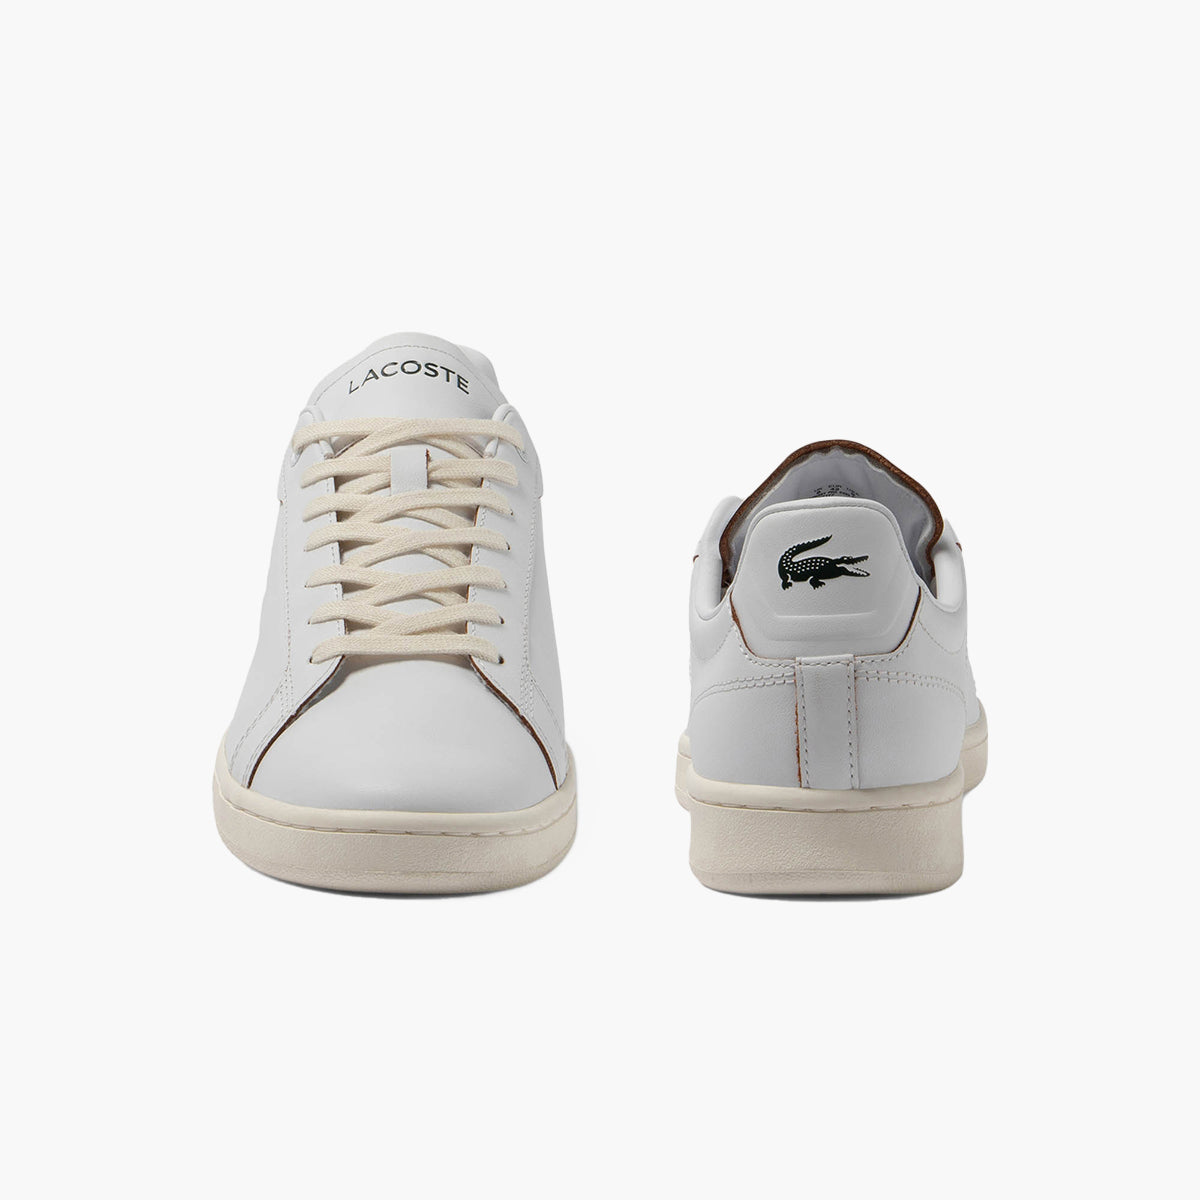 Lacoste Carnaby Pro Tone On Tone Leather Trainers | LEVISONS